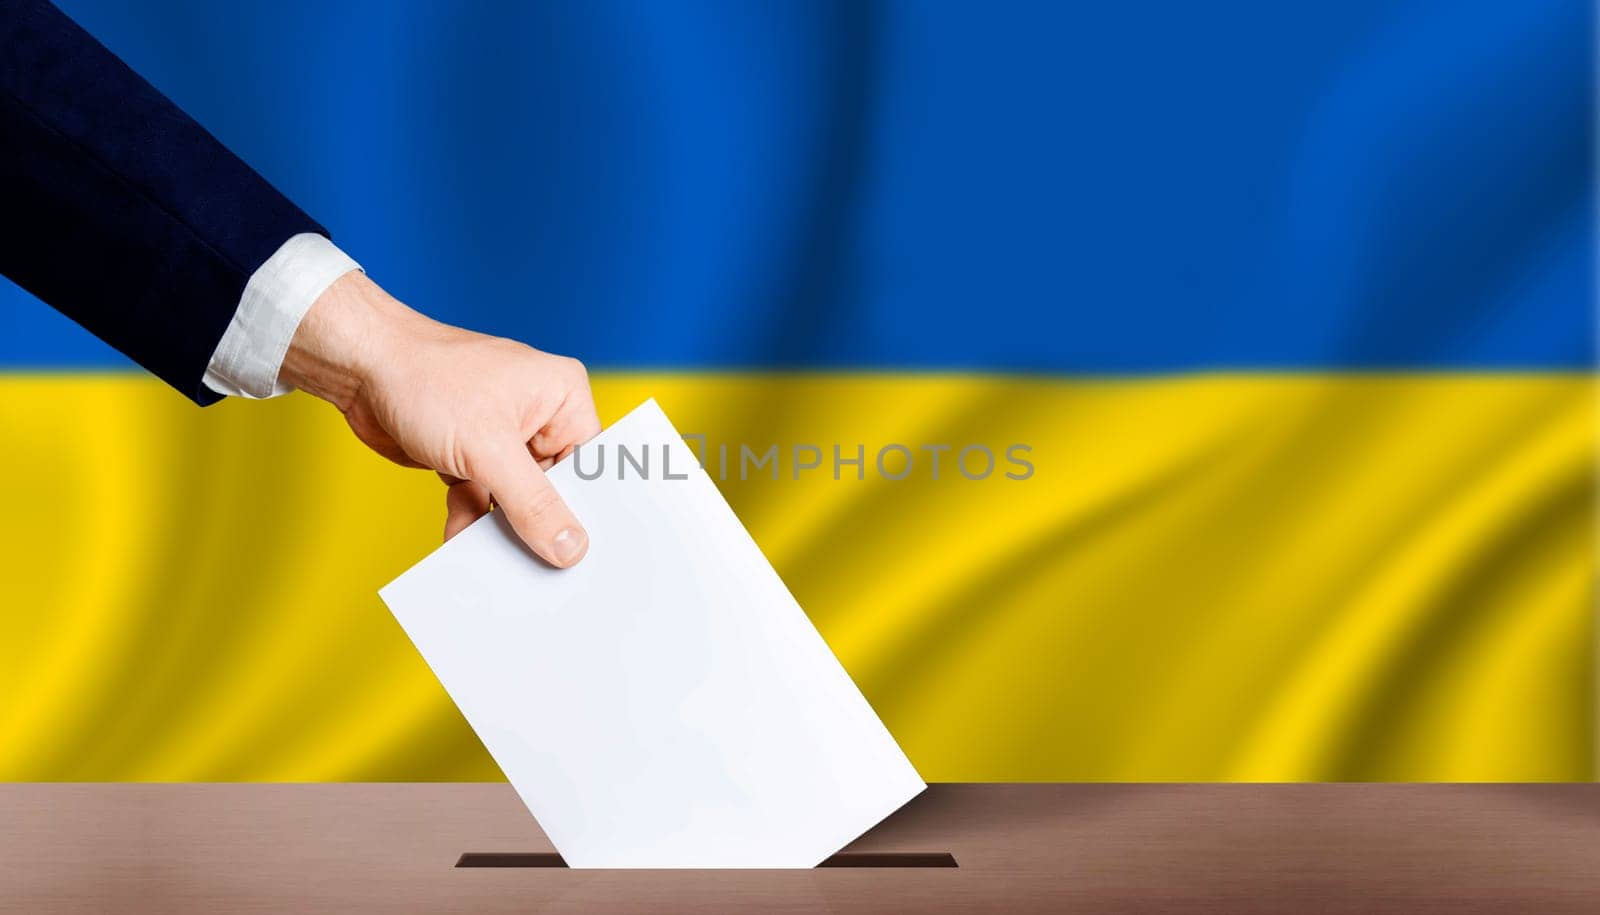 Hand holding ballot in voting ballot box with ukraine flag in background. People puts ballot paper in voting box on Ukraine flag background. Ukraine electoral elections, concept